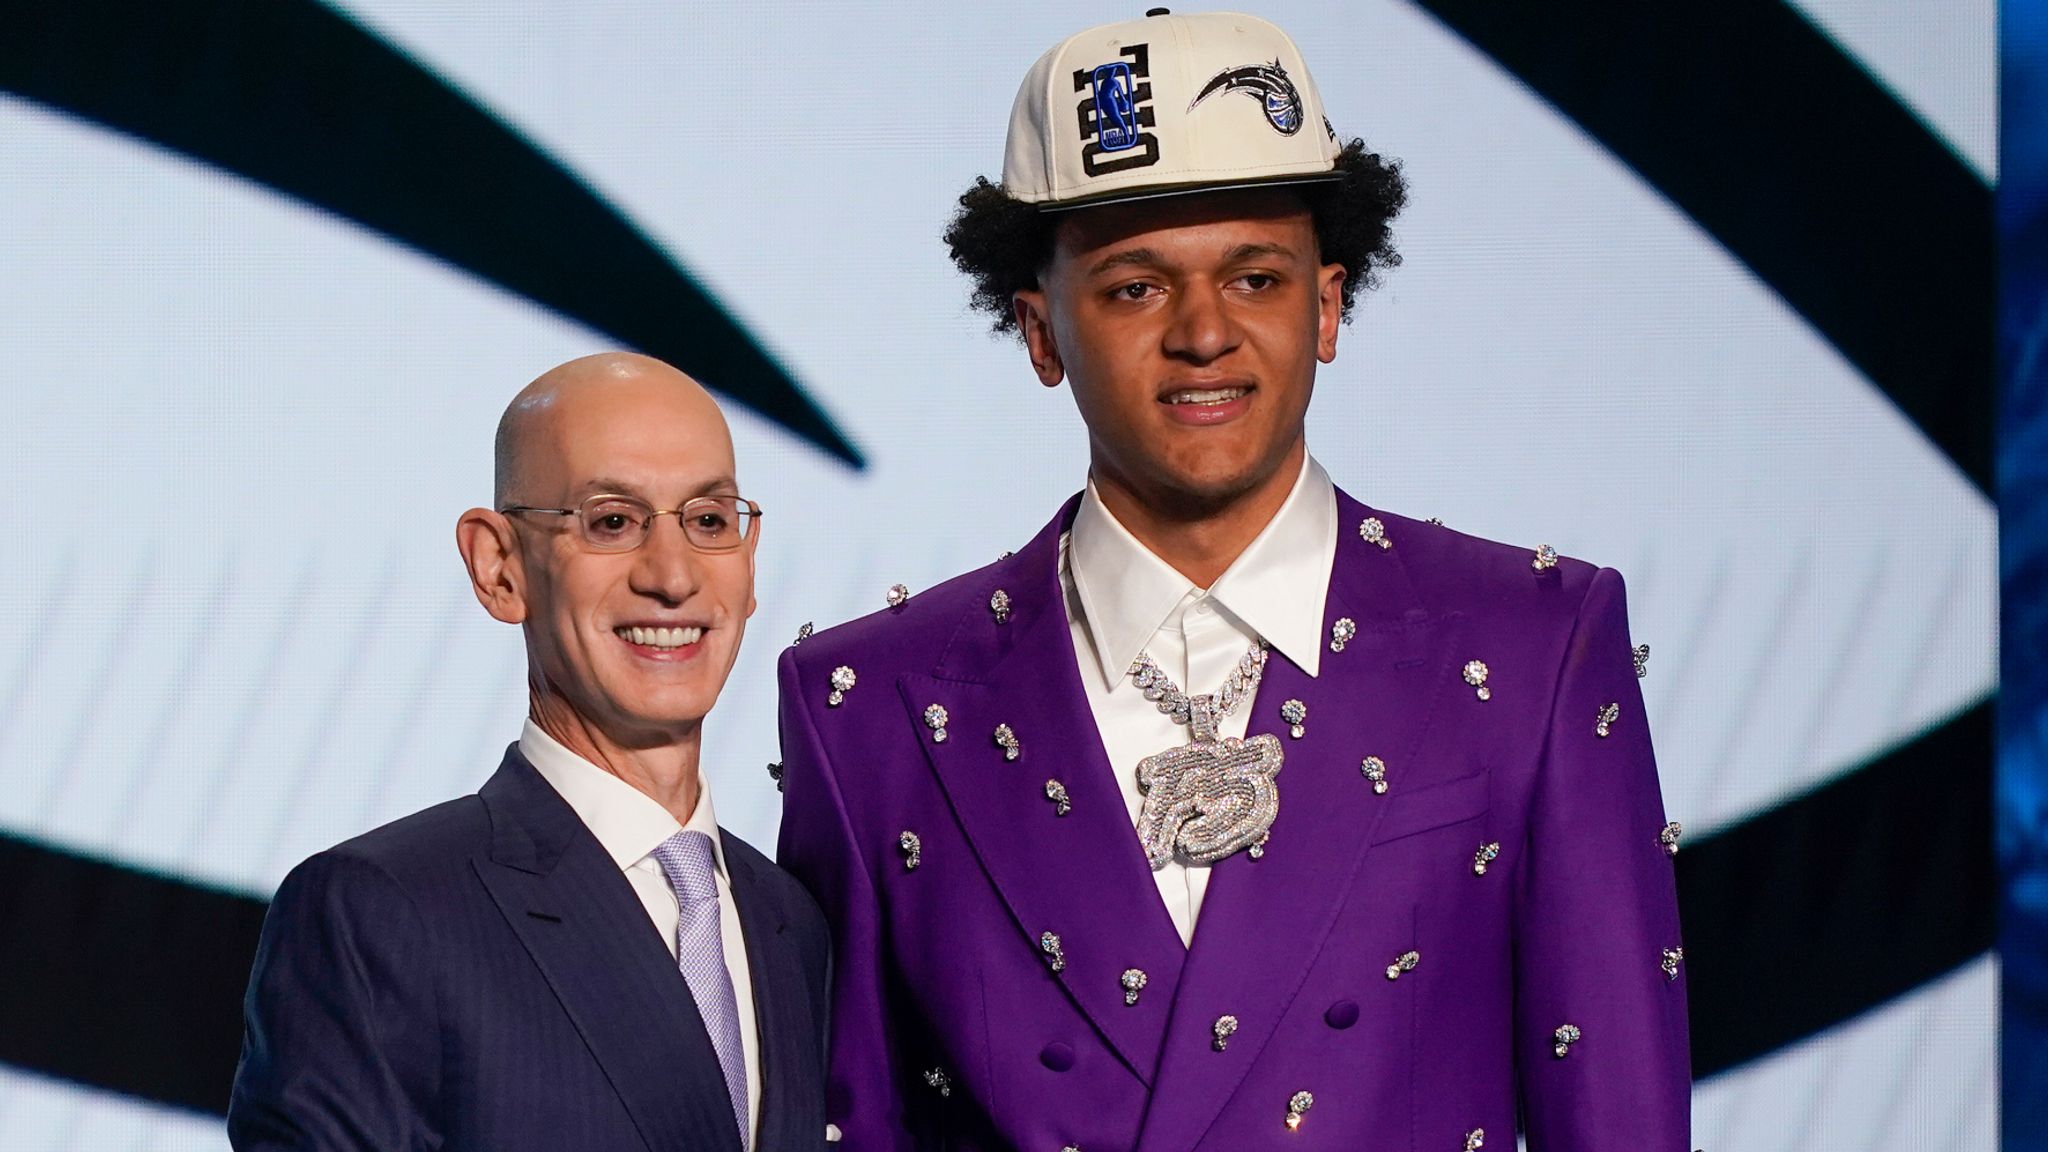 2022 NBA Draft: Pelicans select Dyson Daniels with No. 8 overall pick